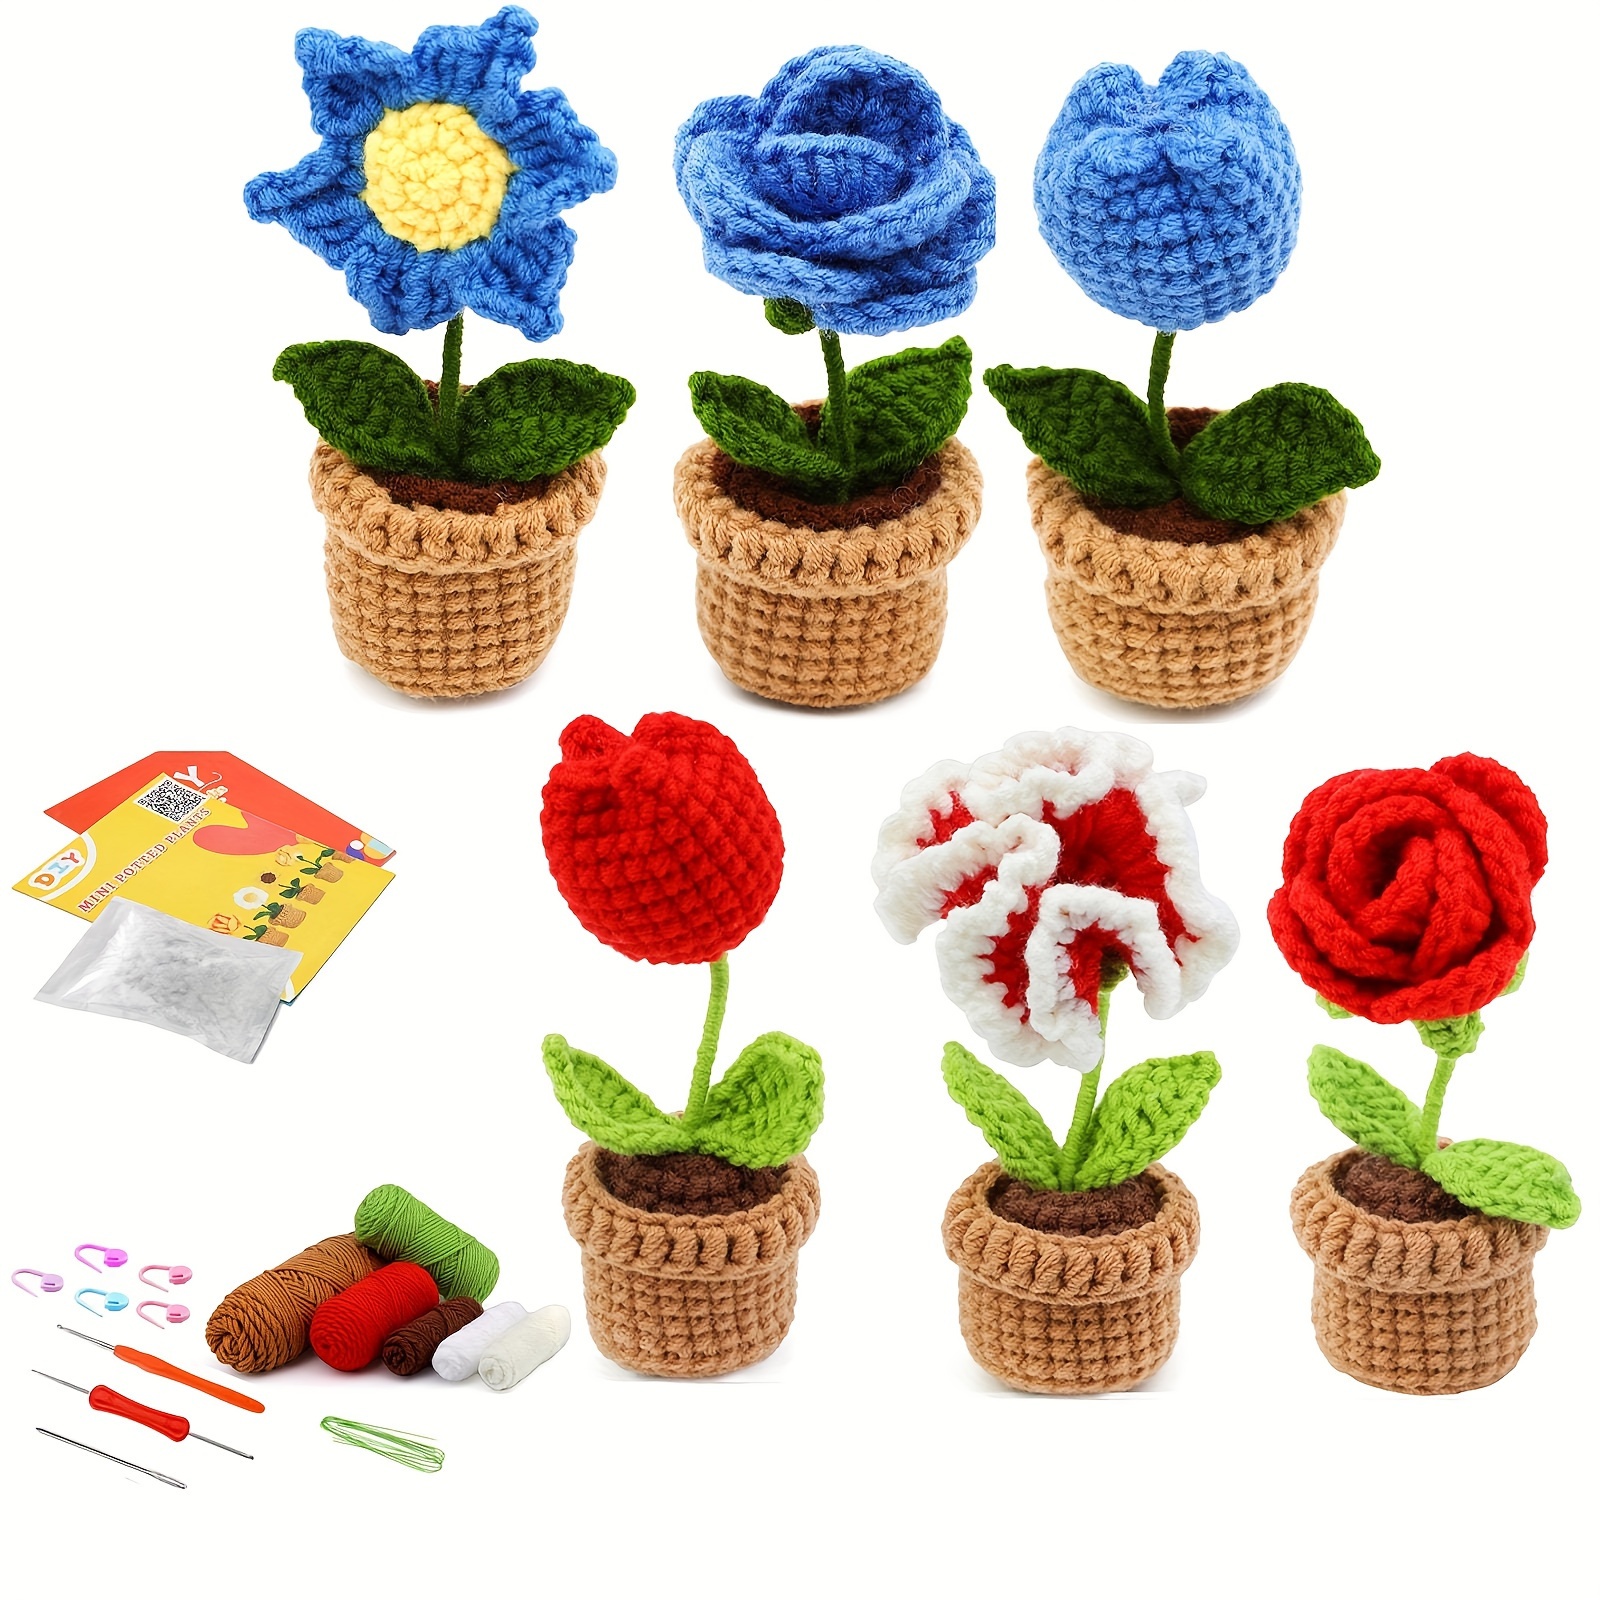 1set Hand-woven Tulip Small Potted Crochet Yarn Set Hand-made DIY Crochet  Knitting Material Package With English Instruction Manual And Teaching Video